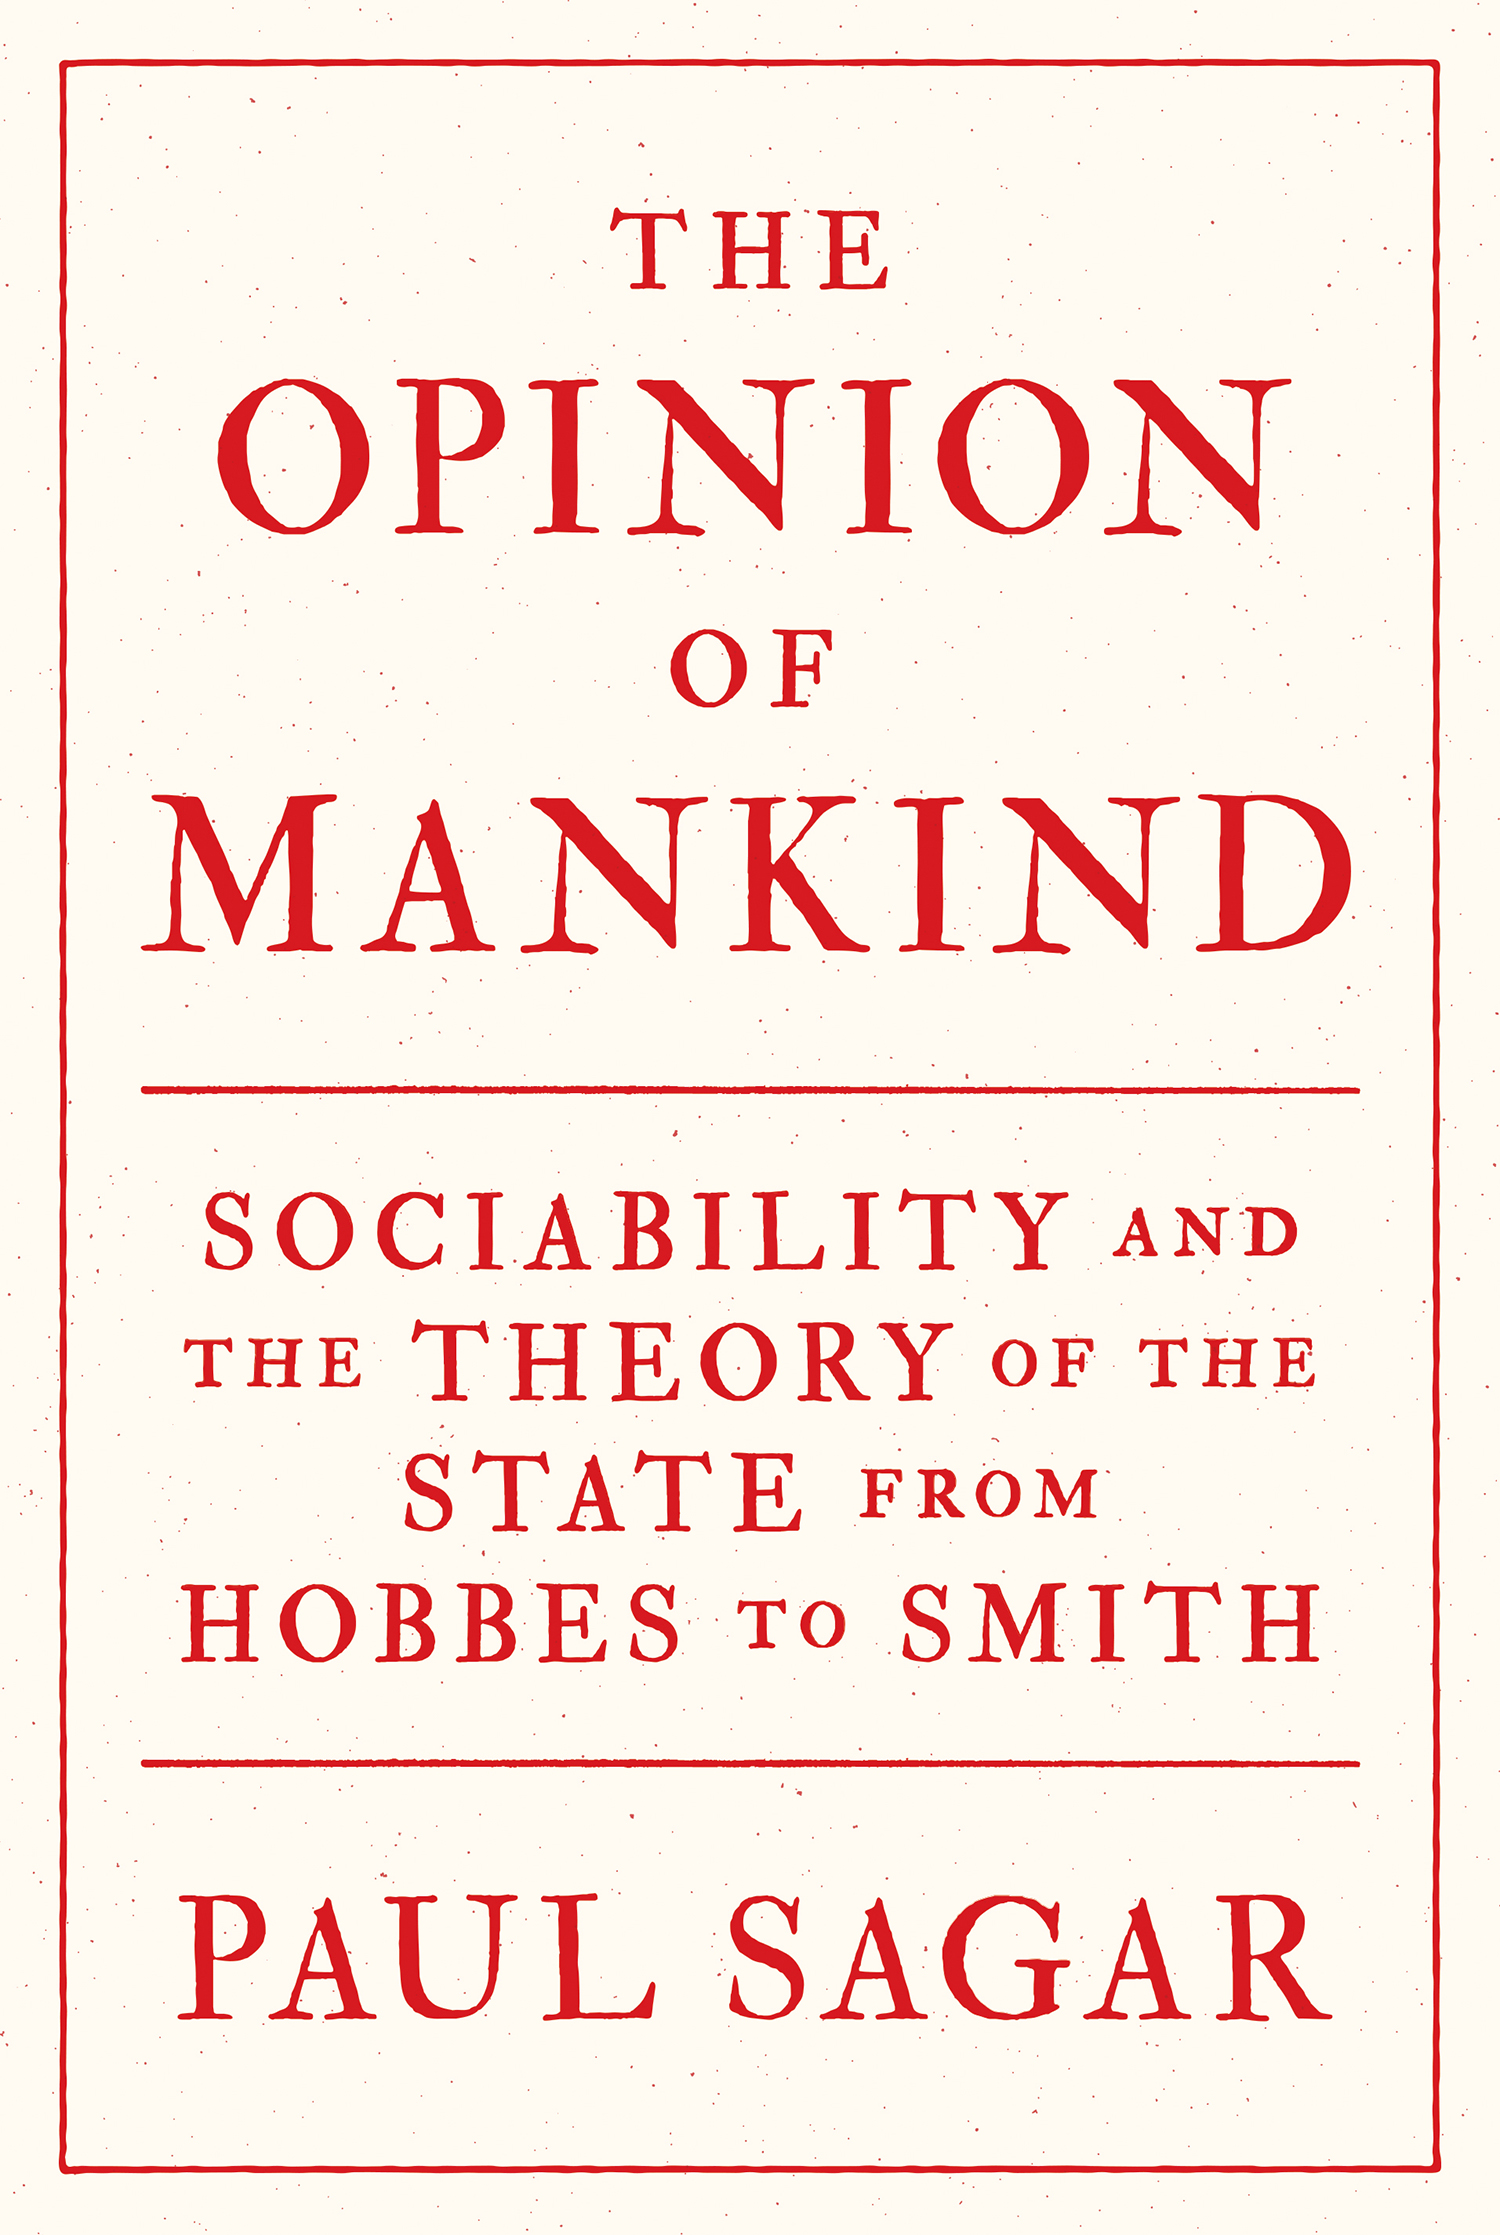 The opinion of mankind sociability and the theory of the state from Hobbes to Smith - image 1